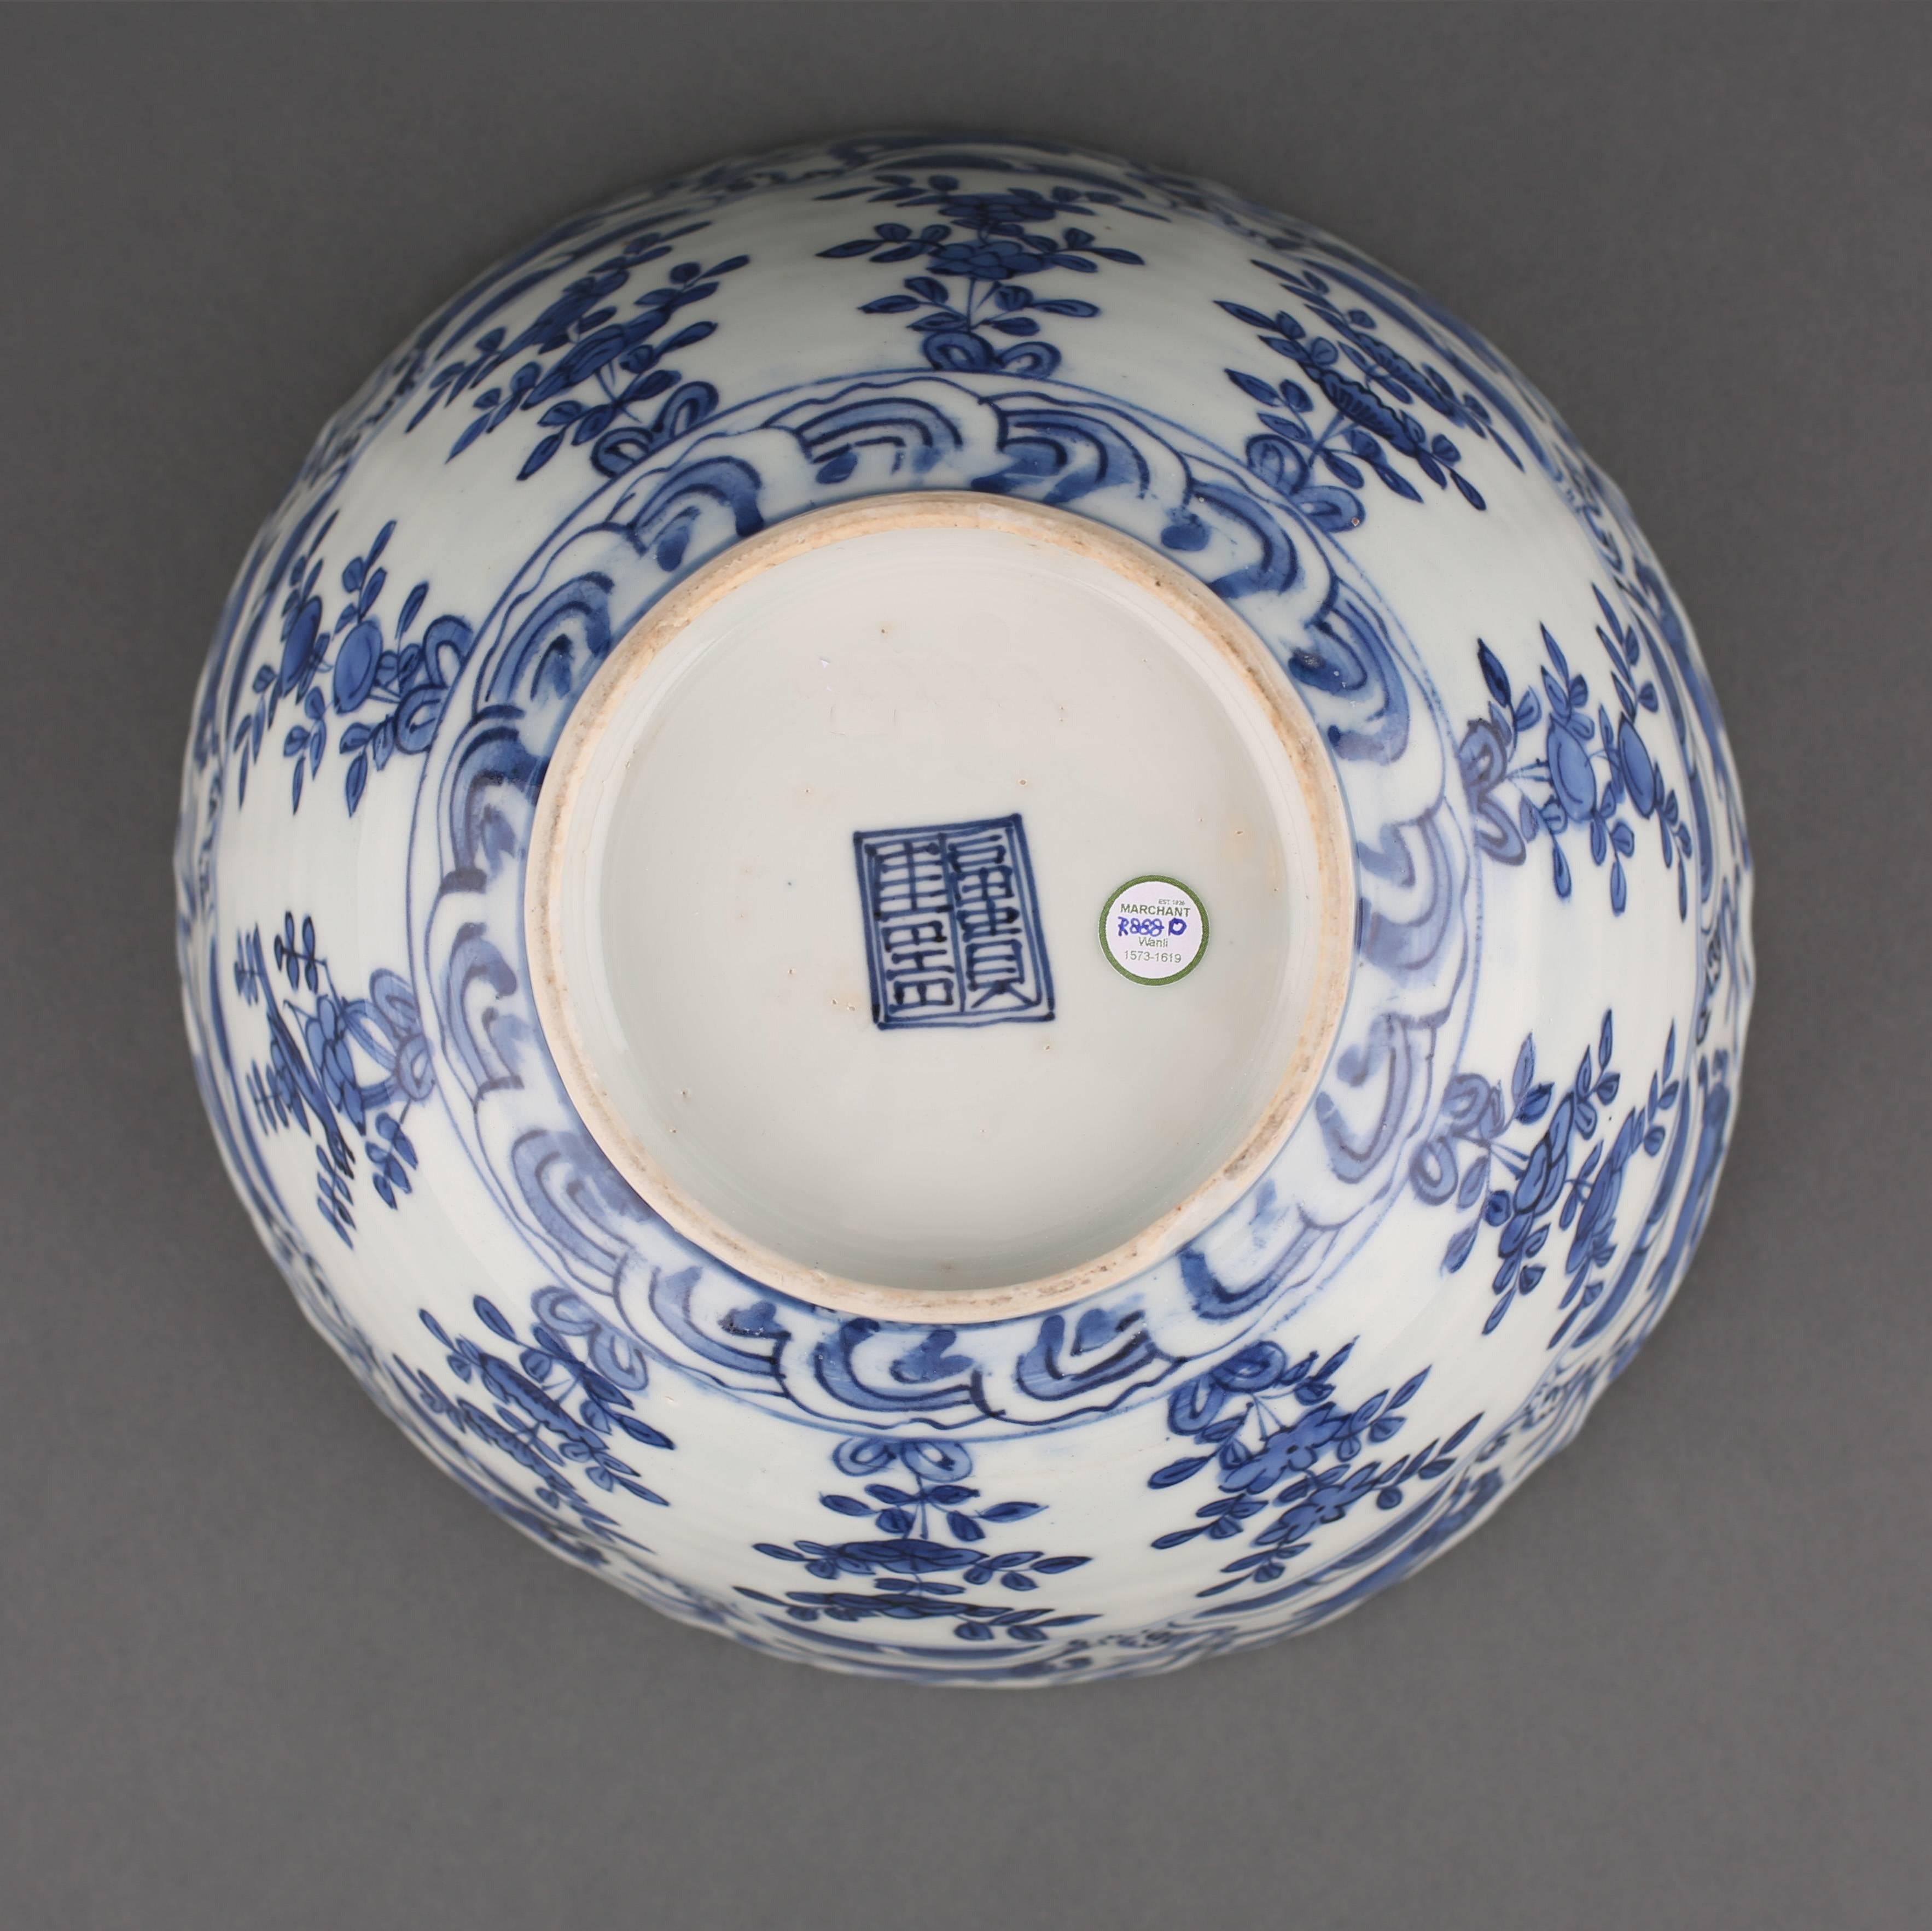 Painted Chinese Ming Porcelain Blue and White Bowl, 16th Century